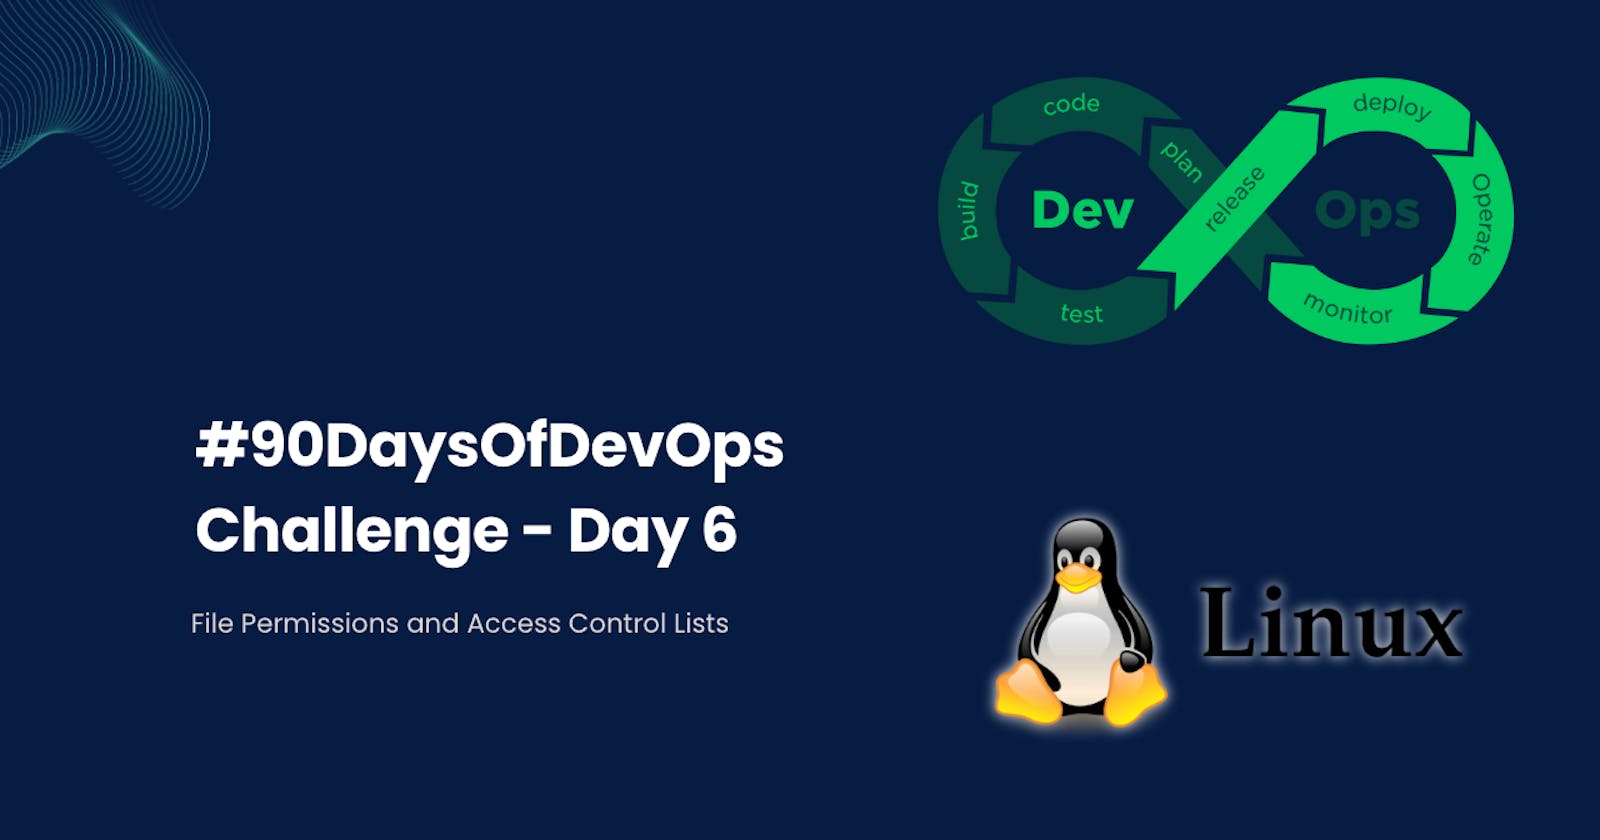 #90DaysOfDevOps Challenge - Day 6 - File Permissions and Access Control Lists